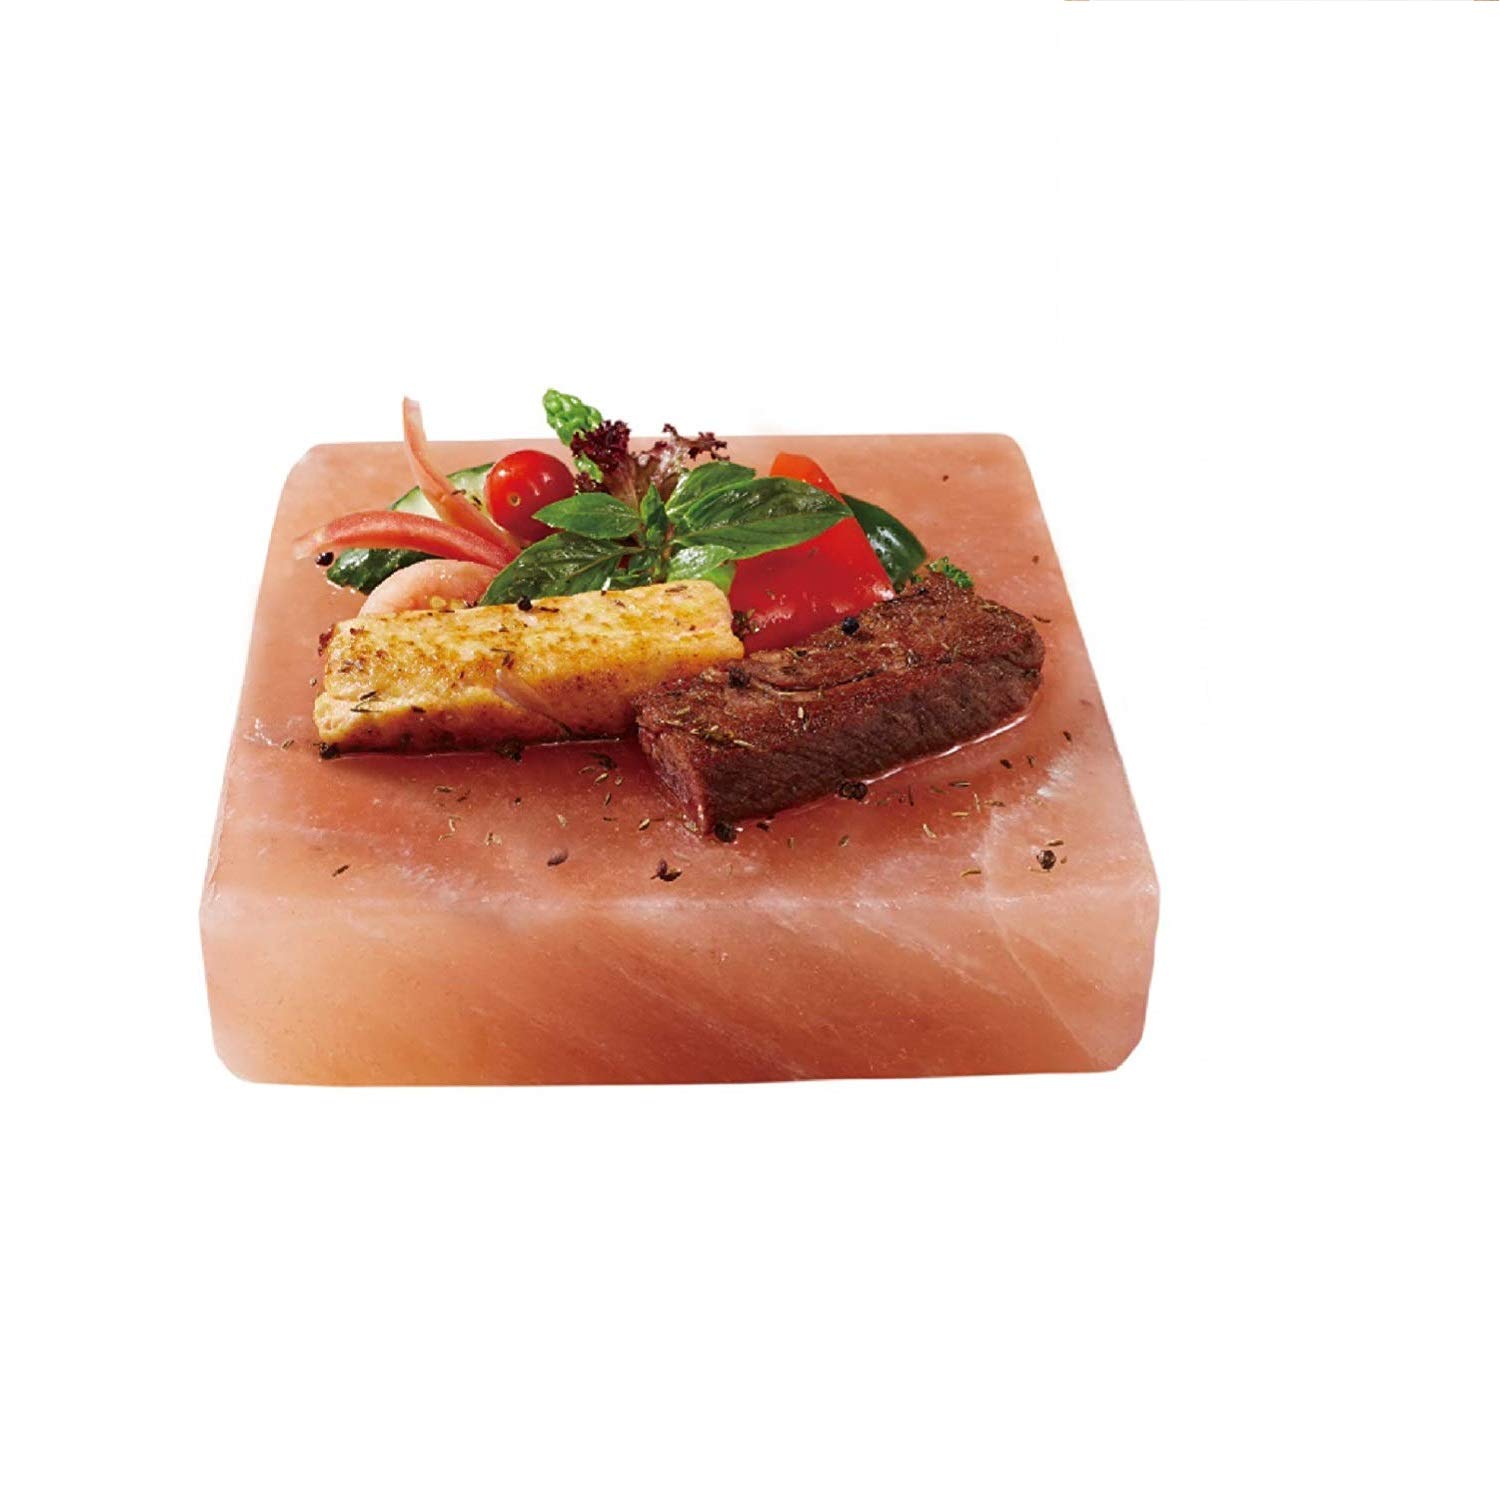 Himalayan Salt Block for Grilling (Large 8 x 8) - FDA Approved All Natural Cooking Slab